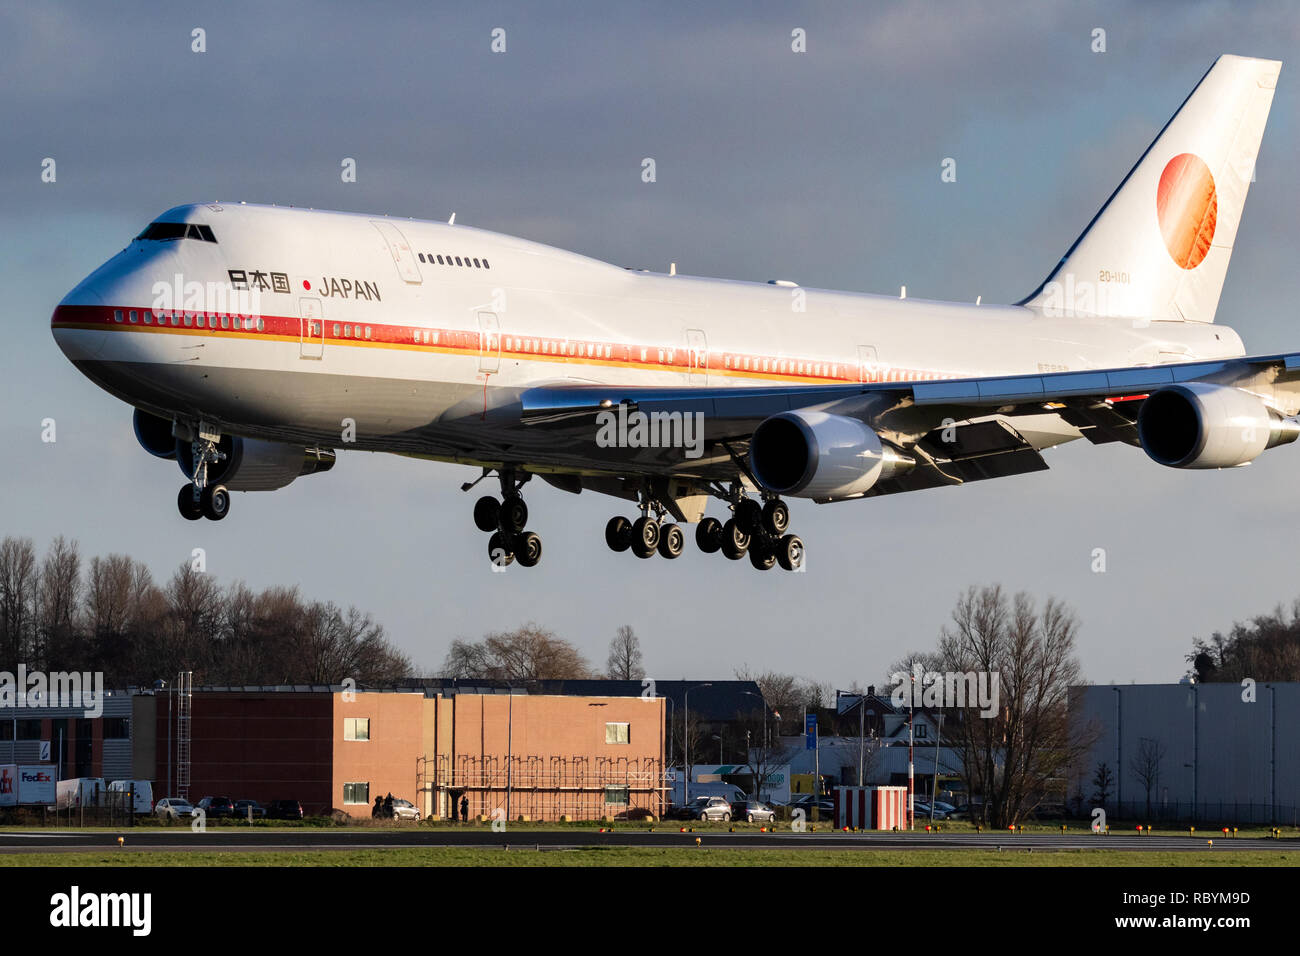 AMSTERDAM, THE NETHERLANDS - JAN 9, 2019: Japanese Air Force One Boeing 747 aircraft bringing the Prime Minister of Japan Shinzo Abe for a short visit Stock Photo